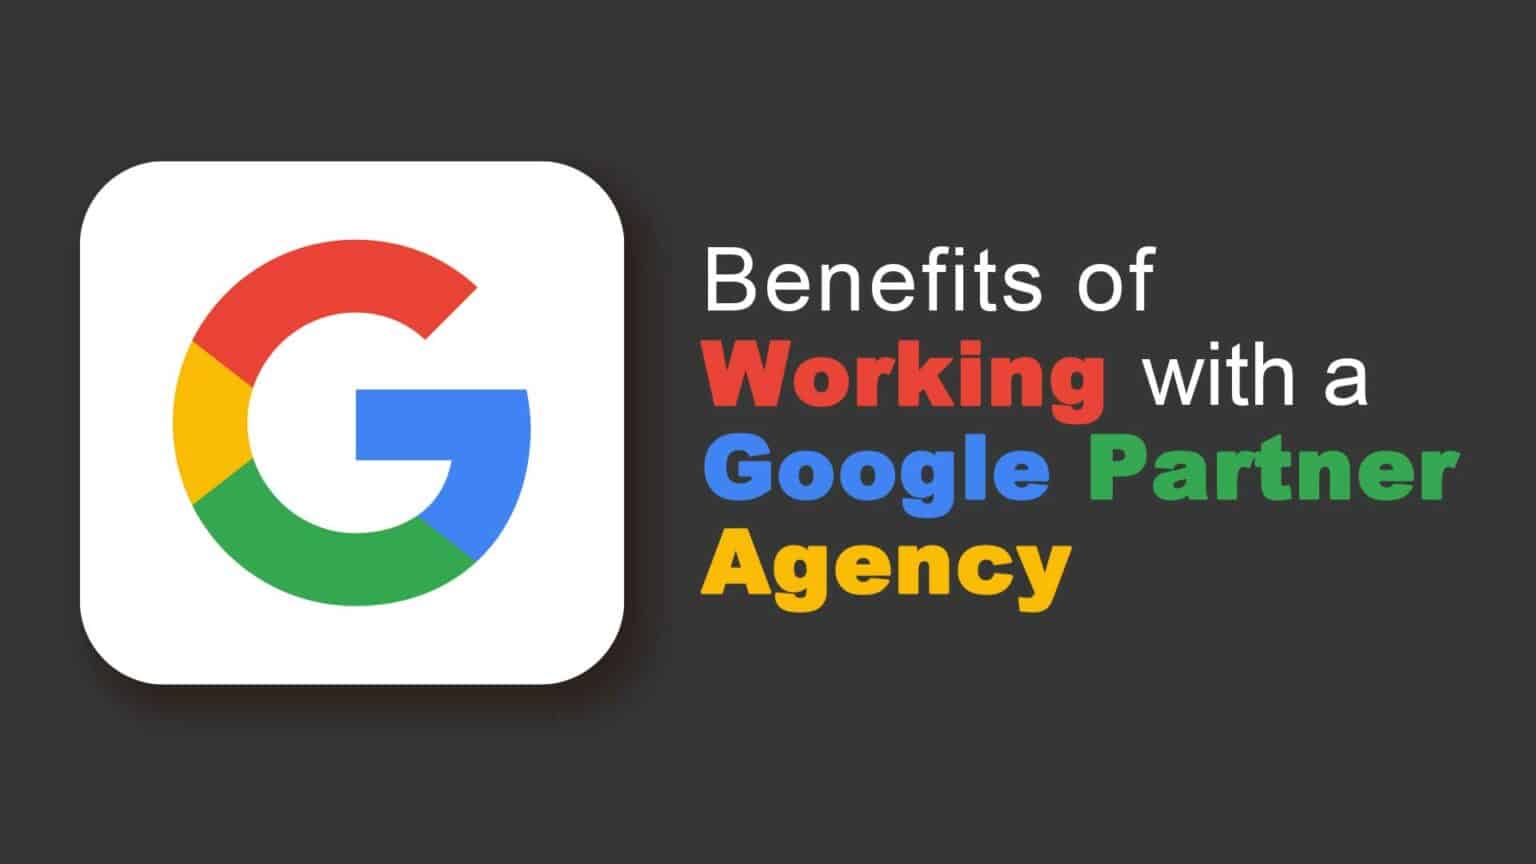 Google logo next to text that says Benefits of Working with a Google Partner Agency